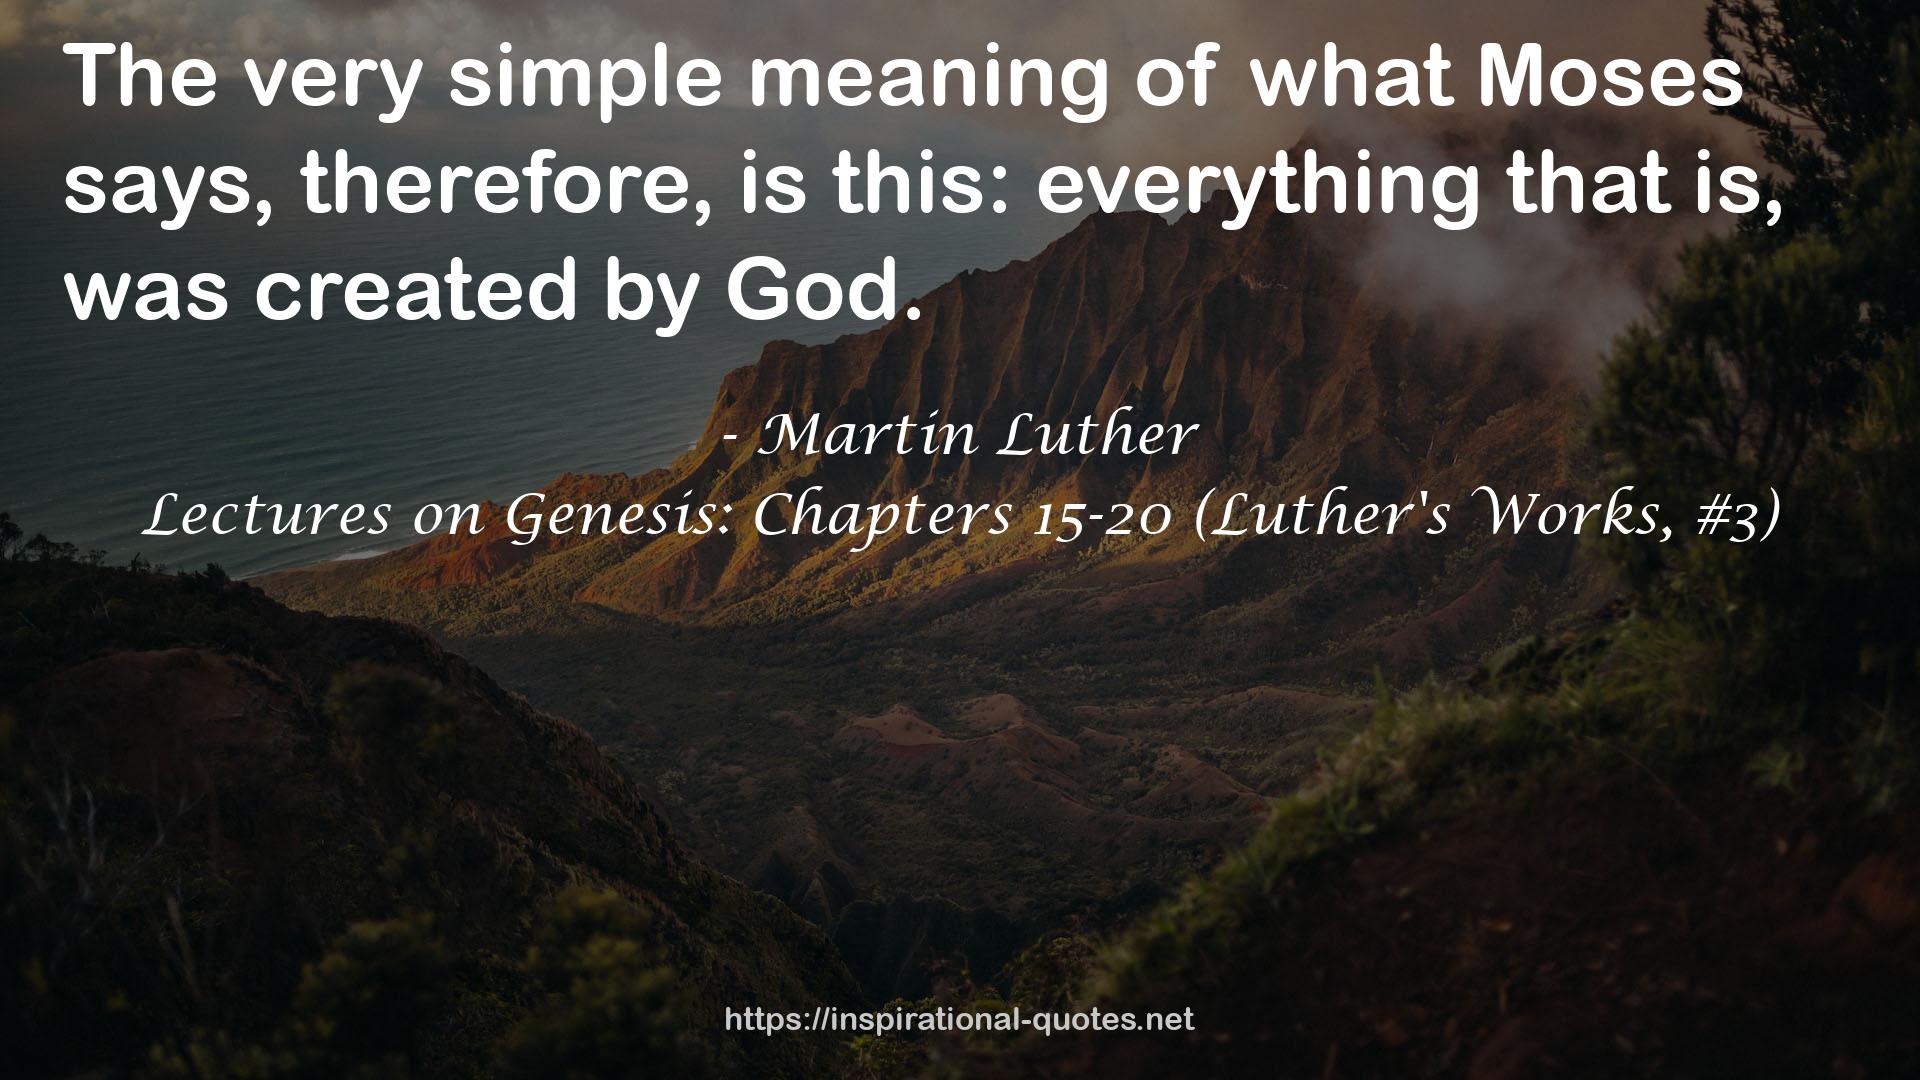 Lectures on Genesis: Chapters 15-20 (Luther's Works, #3) QUOTES